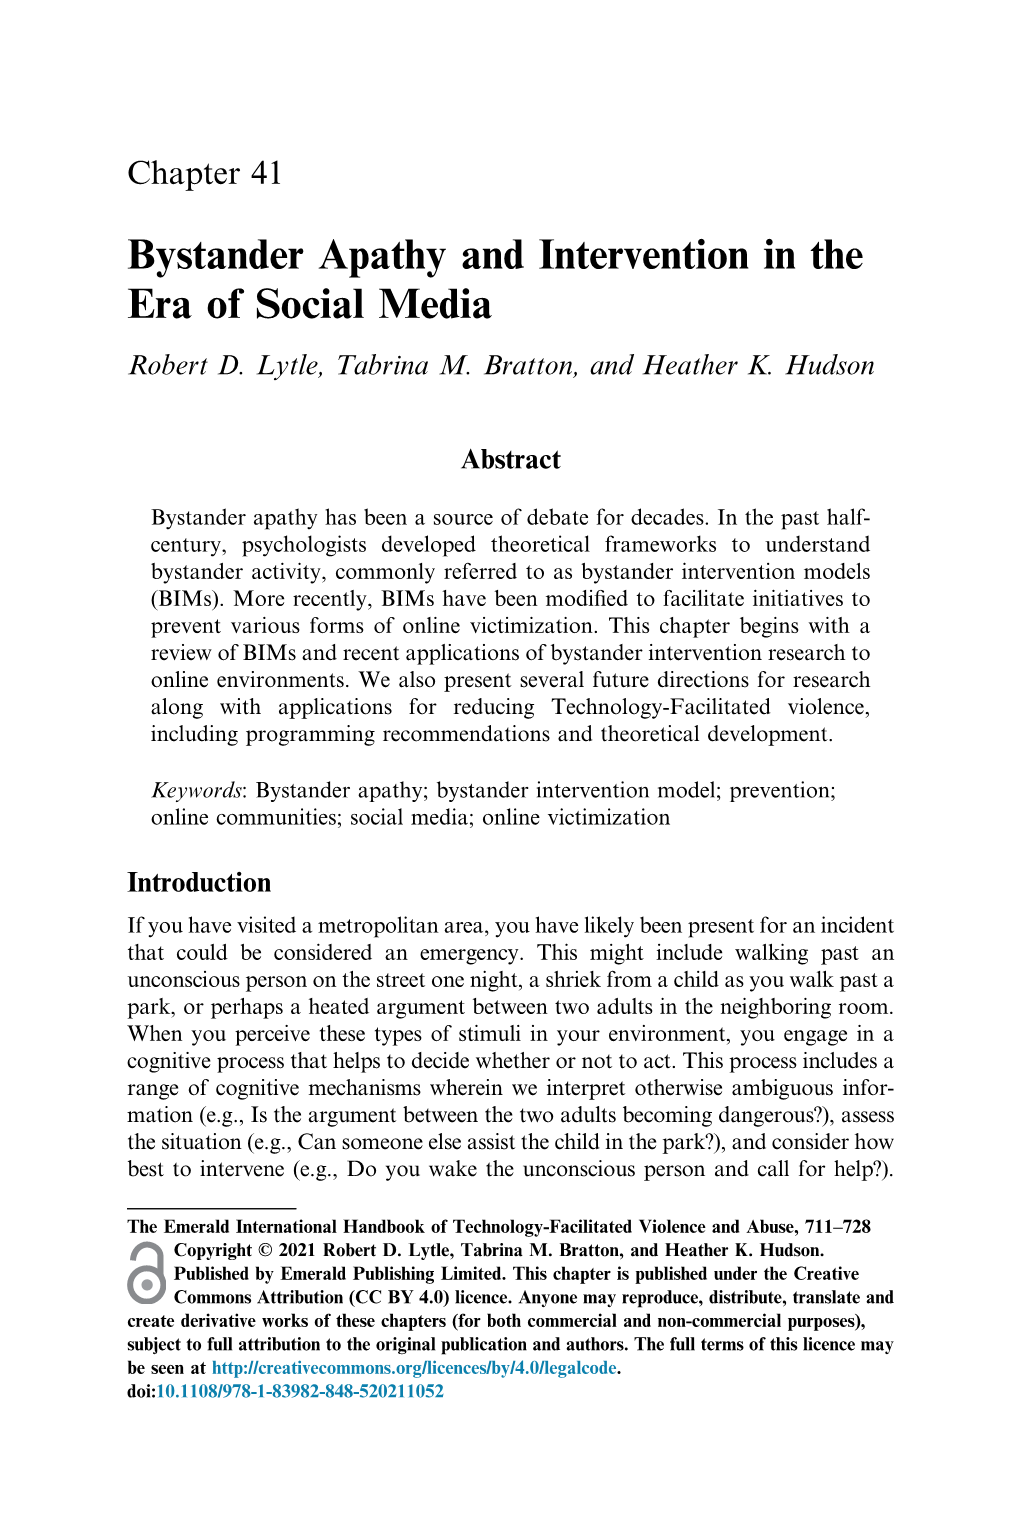 Bystander Apathy and Intervention in the Era of Social Media Robert D